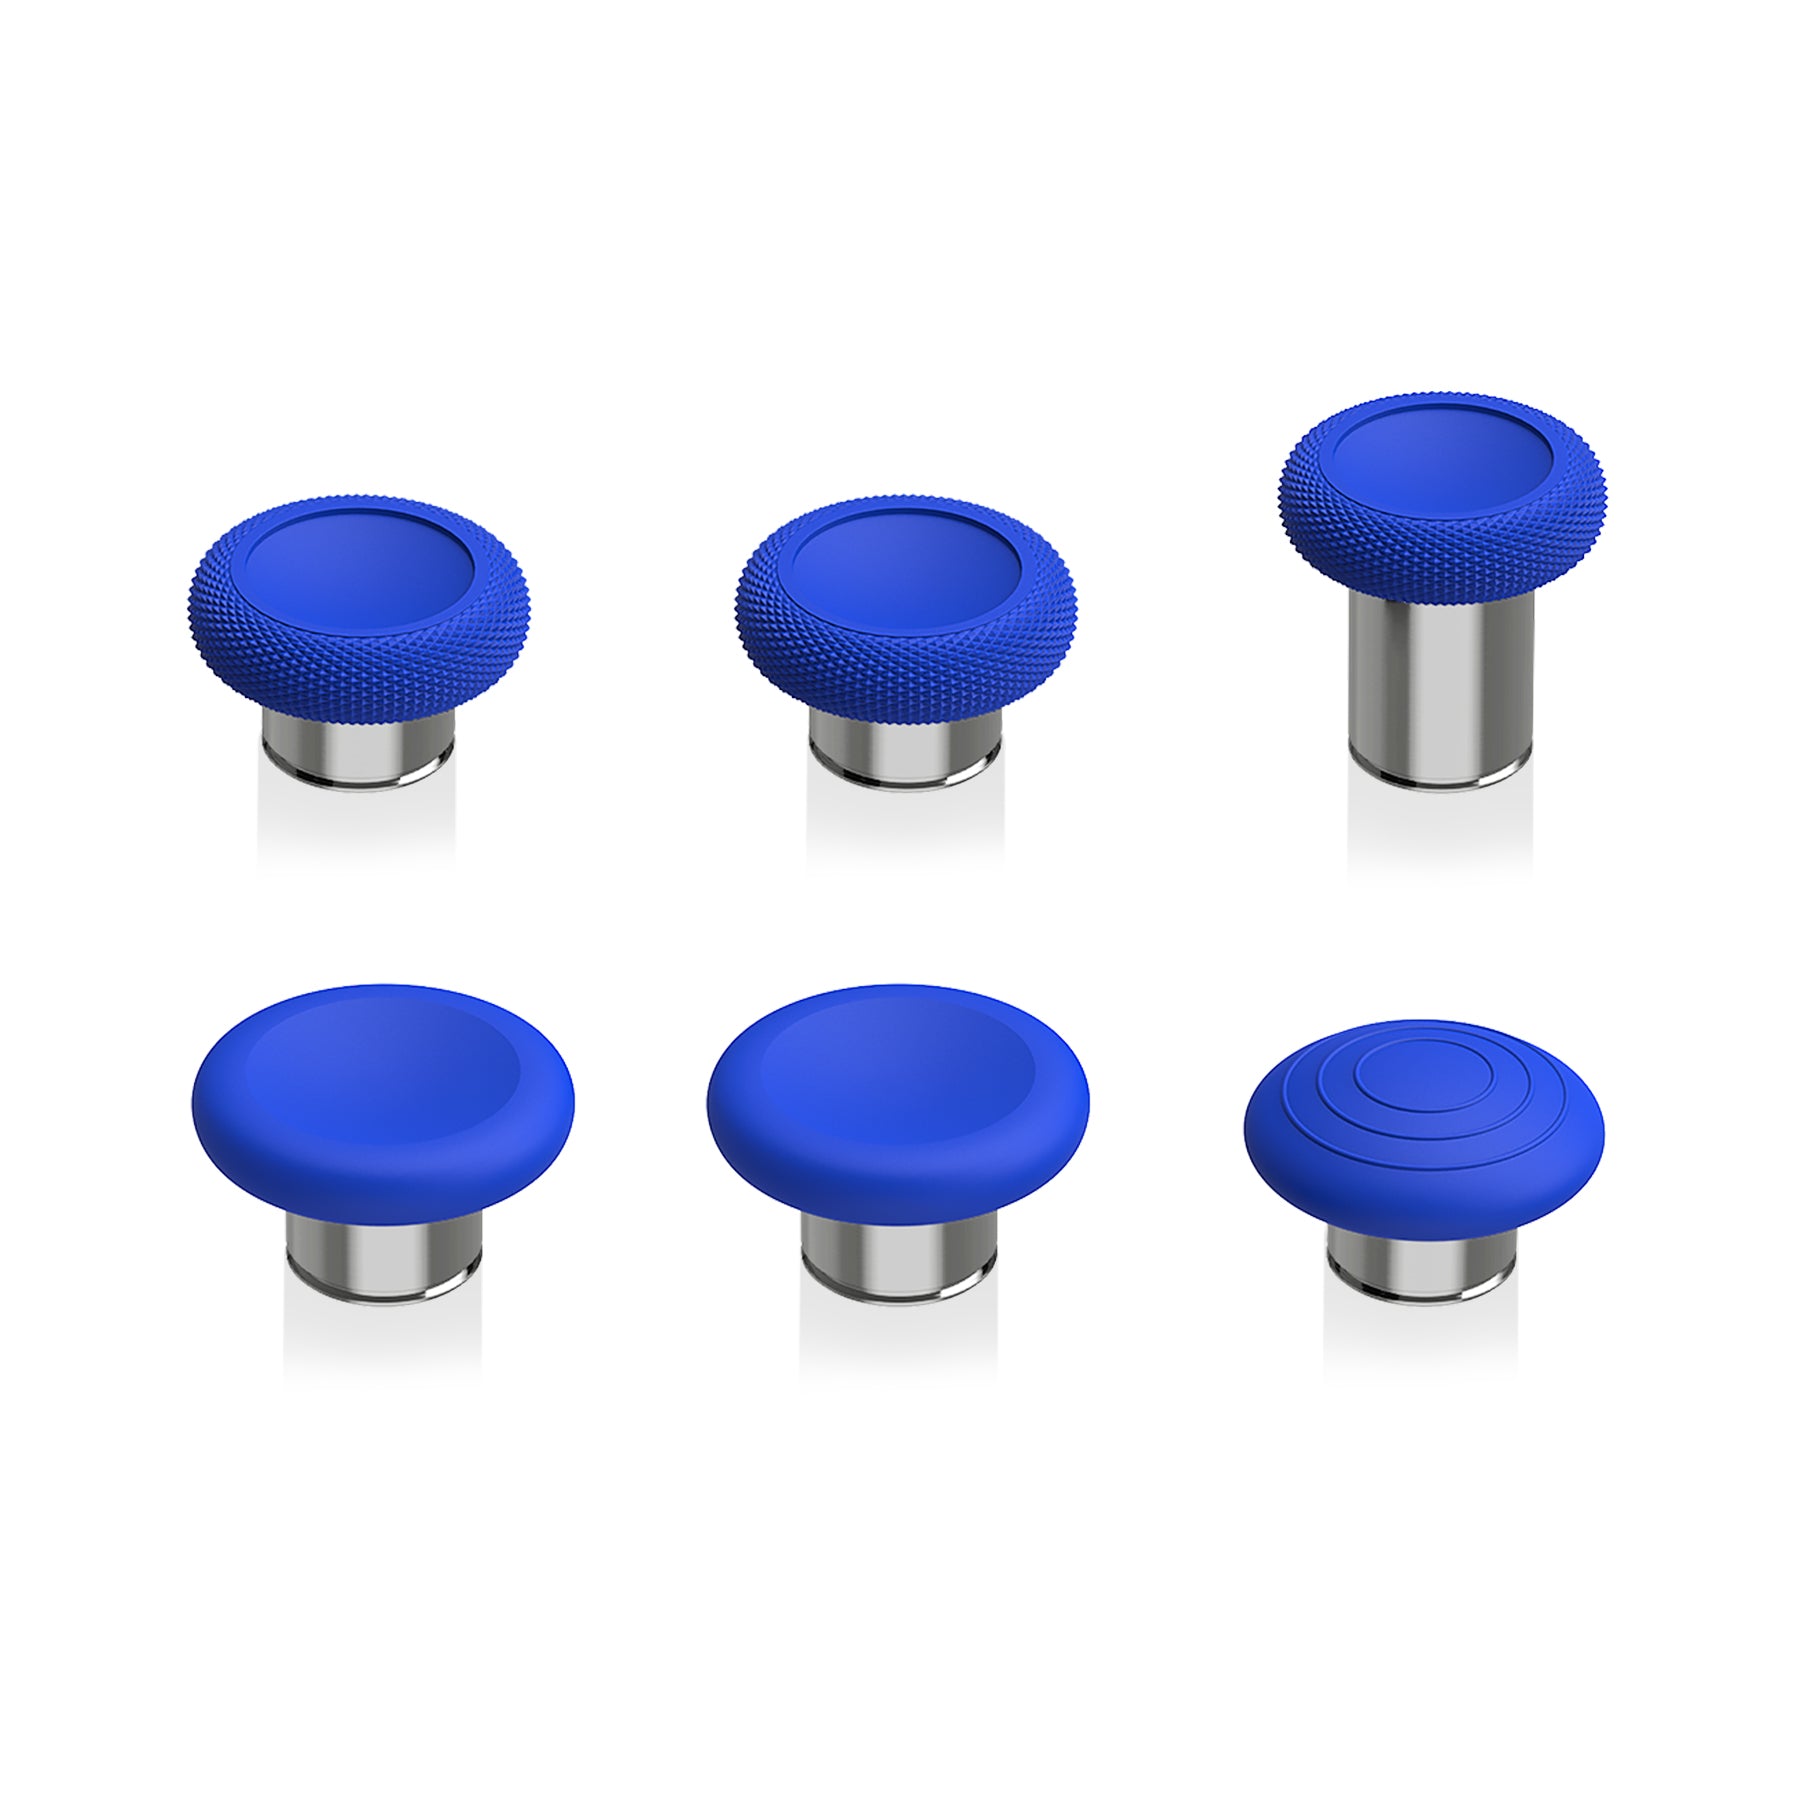 eXtremeRate 6 in 1 Metal Replacement Thumbsticks for Xbox Elite Series 2 & Elite 2 Core Controller (Model 1797) - Blue & Metallic Silver eXtremeRate